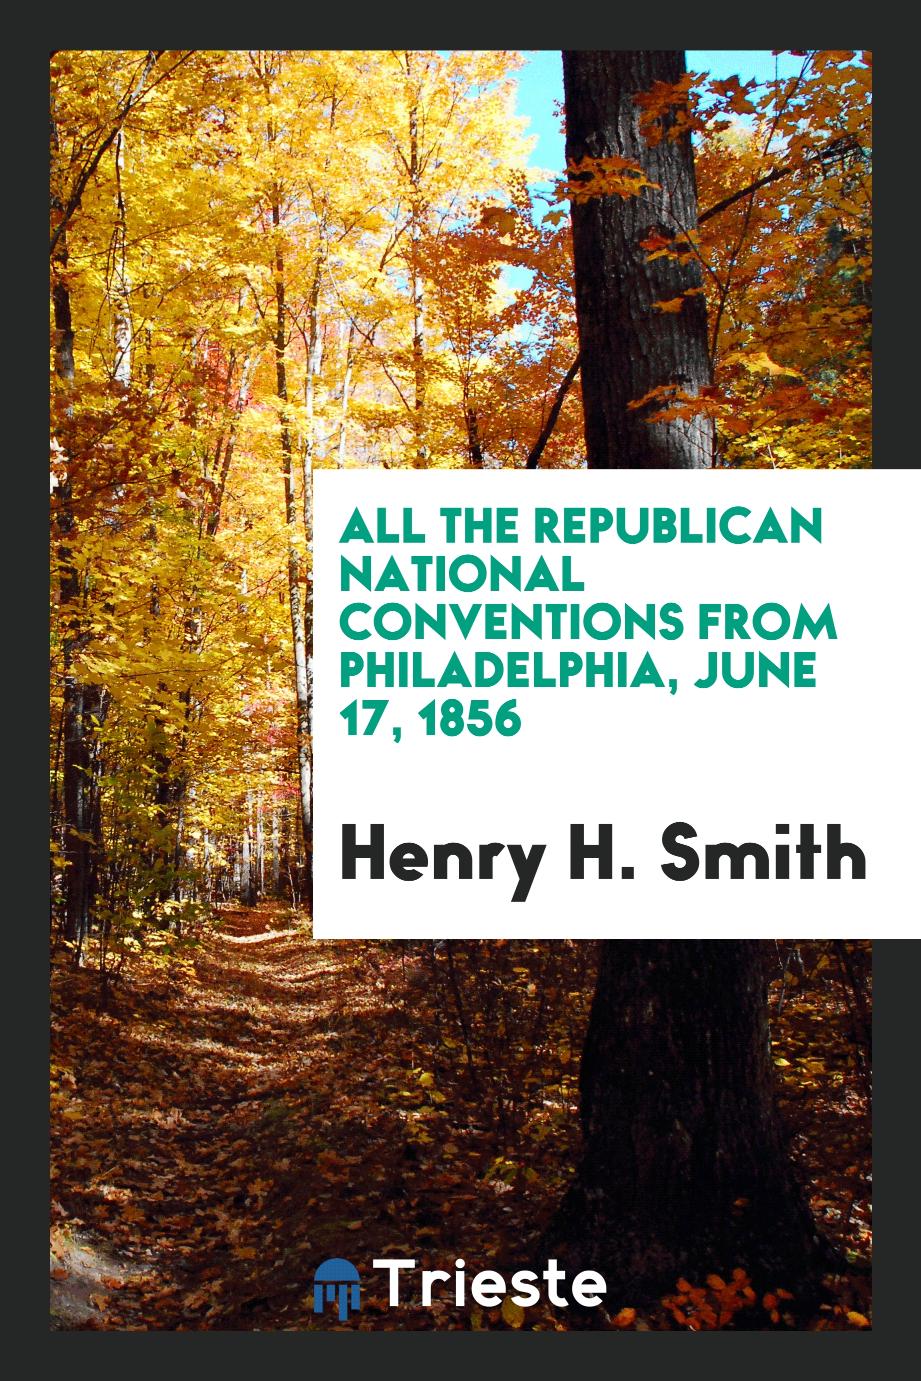 All the Republican National Conventions from Philadelphia, June 17, 1856